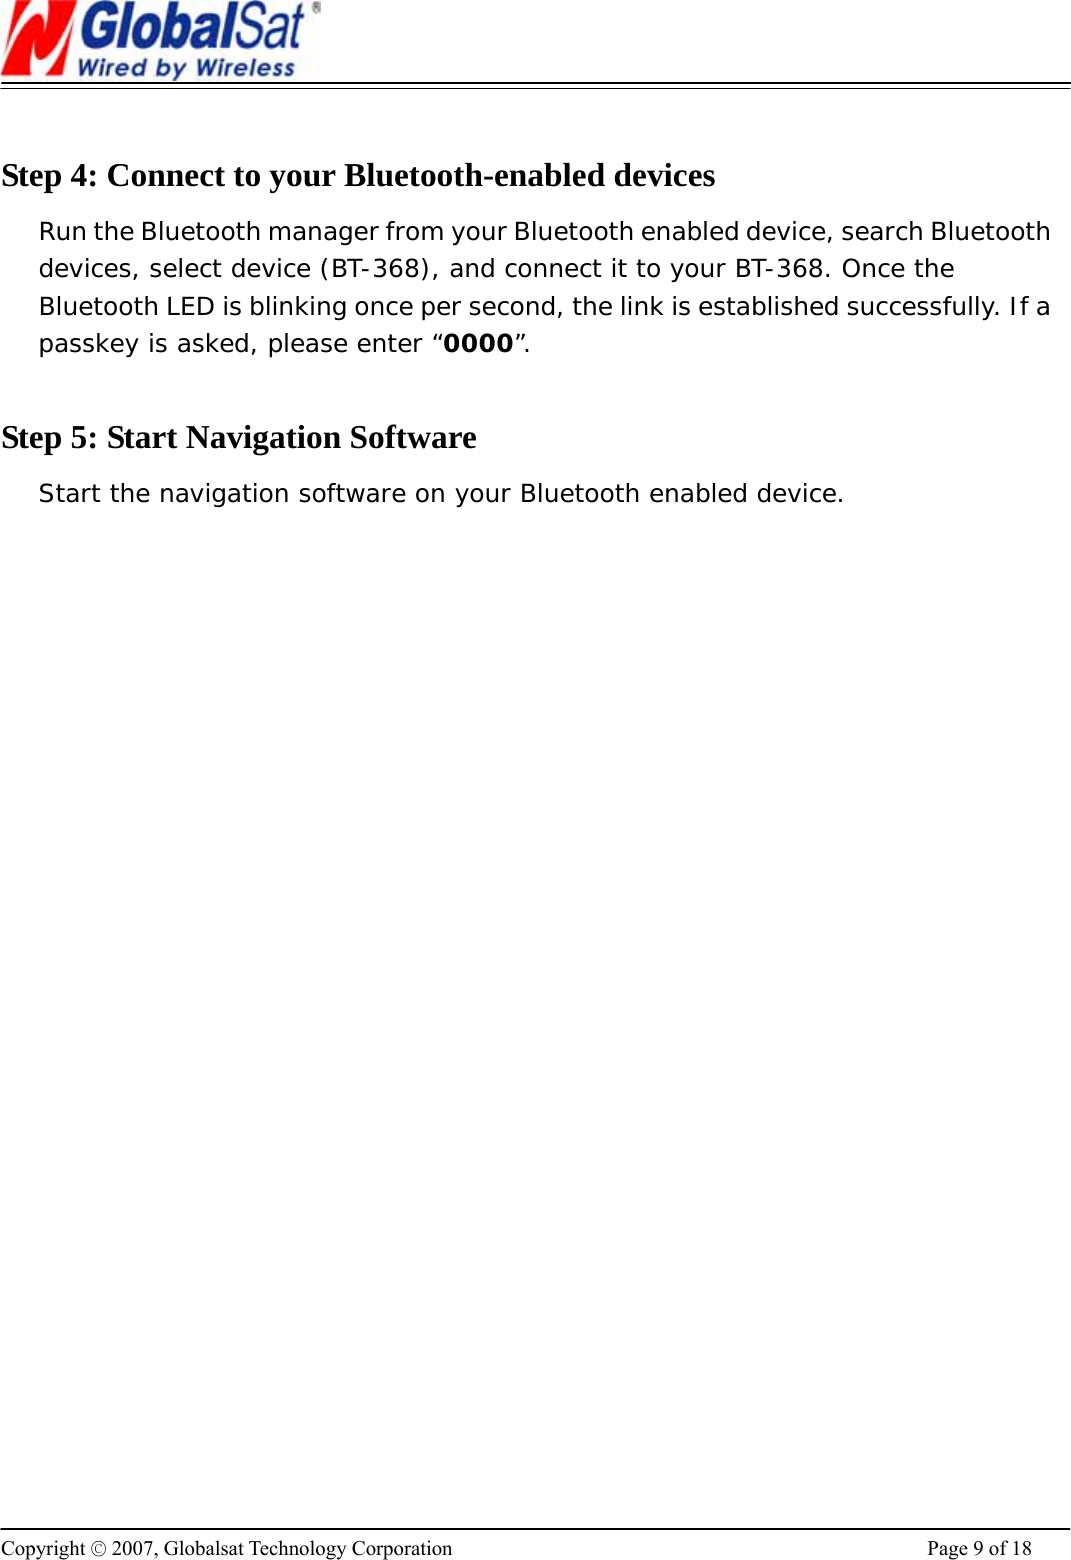                                                                      Copyright © 2007, Globalsat Technology Corporation  Page 9 of 18  Step 4: Connect to your Bluetooth-enabled devices Run the Bluetooth manager from your Bluetooth enabled device, search Bluetooth devices, select device (BT-368), and connect it to your BT-368. Once the Bluetooth LED is blinking once per second, the link is established successfully. If a passkey is asked, please enter “0000”.   Step 5: Start Navigation Software Start the navigation software on your Bluetooth enabled device.    